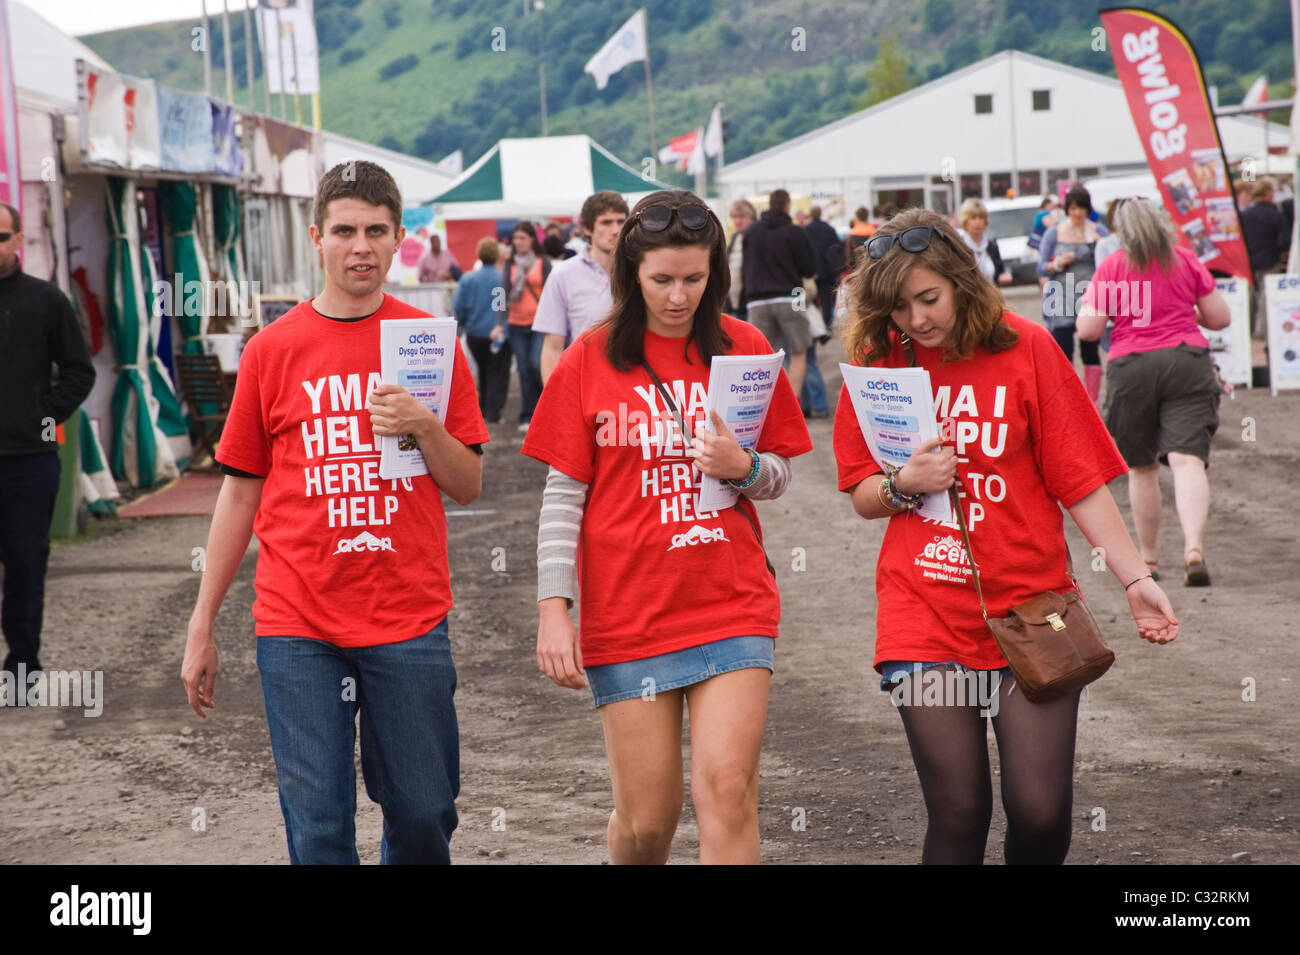 Young HERE TO HELP volunteers at National Eisteddfod of Wales 2010 Ebbw Vale Blaenau Gwent South Wales UK Stock Photo